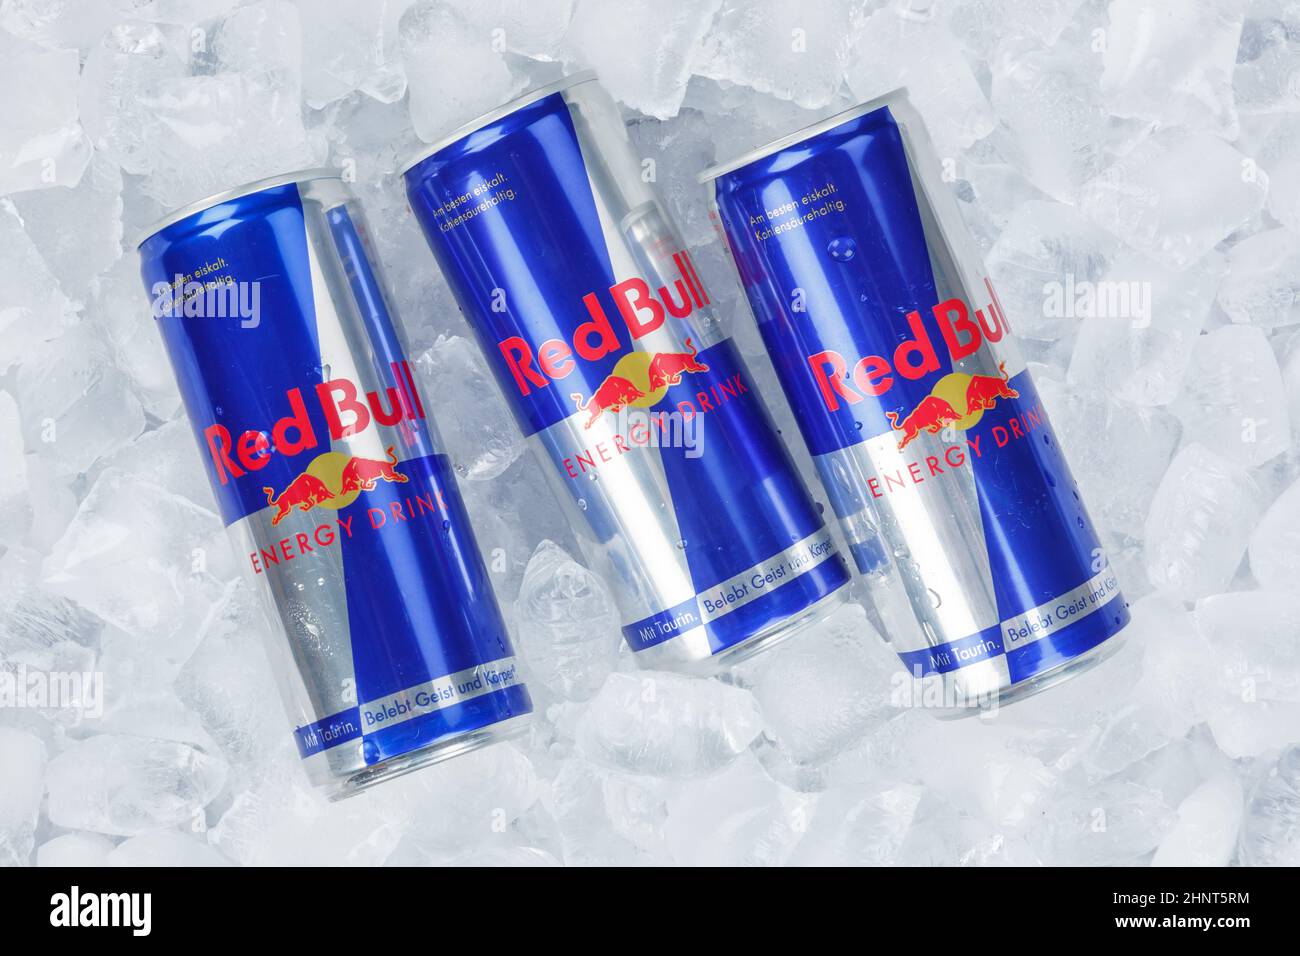 Red Bull Energy Drink lemonade soft drinks in cans on ice cubes Stock Photo